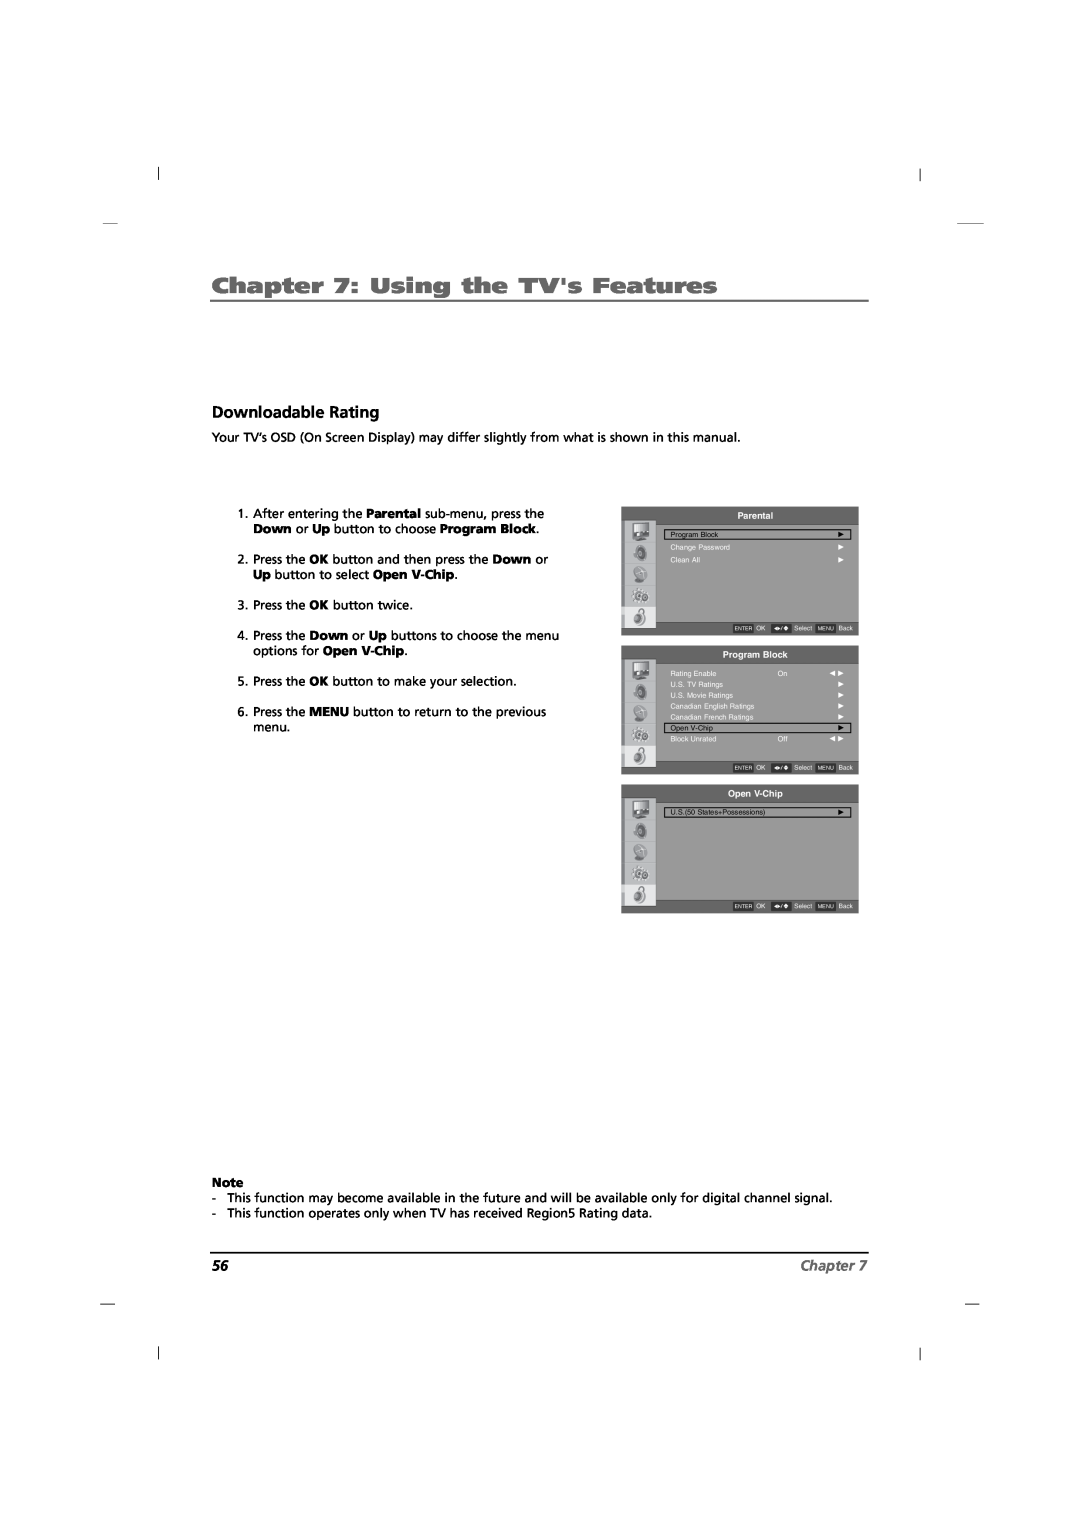 RCA J12H770 manual Downloadable Rating, Using the TVs Features, Chapter, U.S.50 States+Possessions 